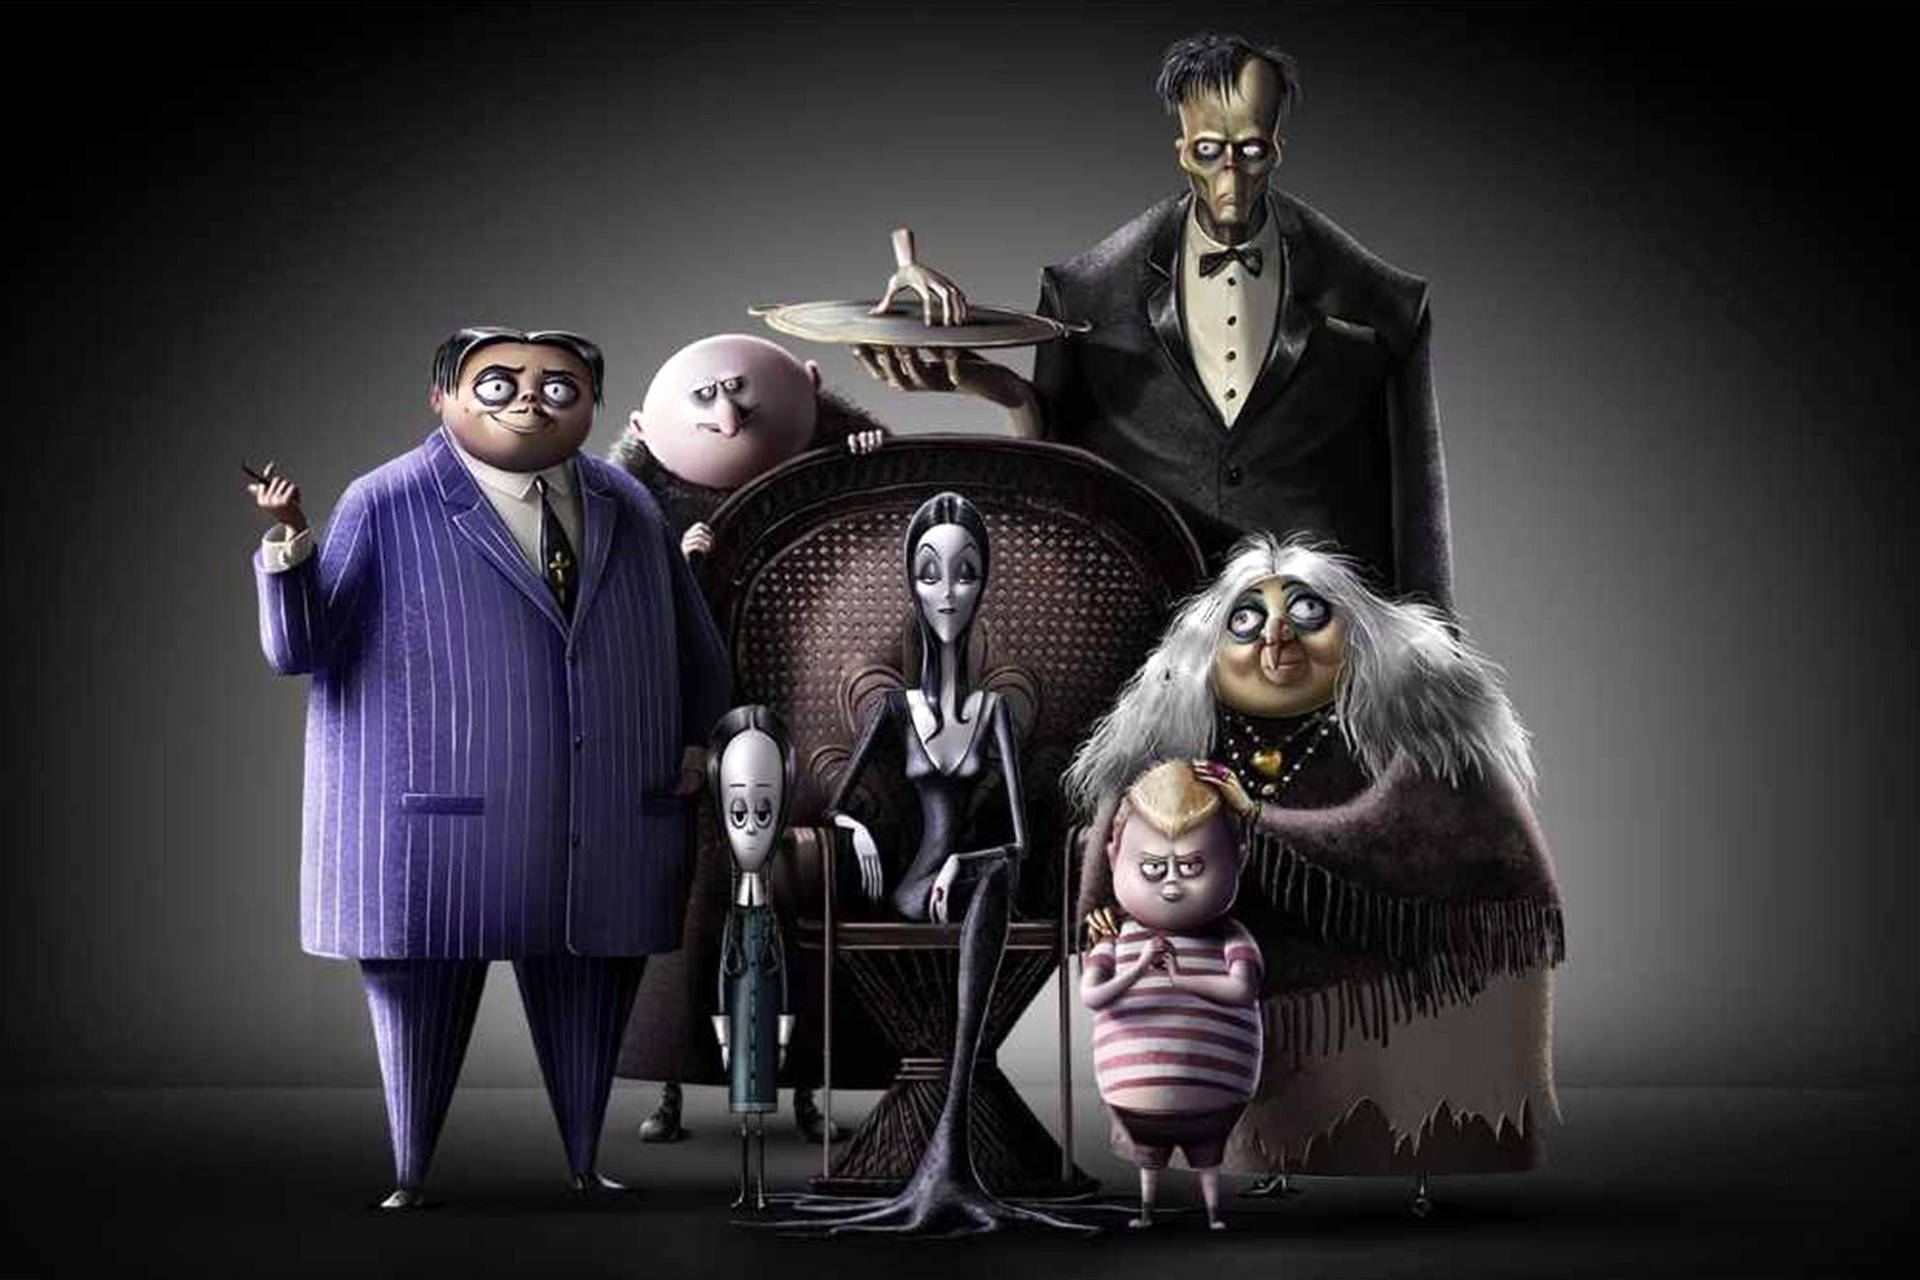 The Addams Family Wallpapers